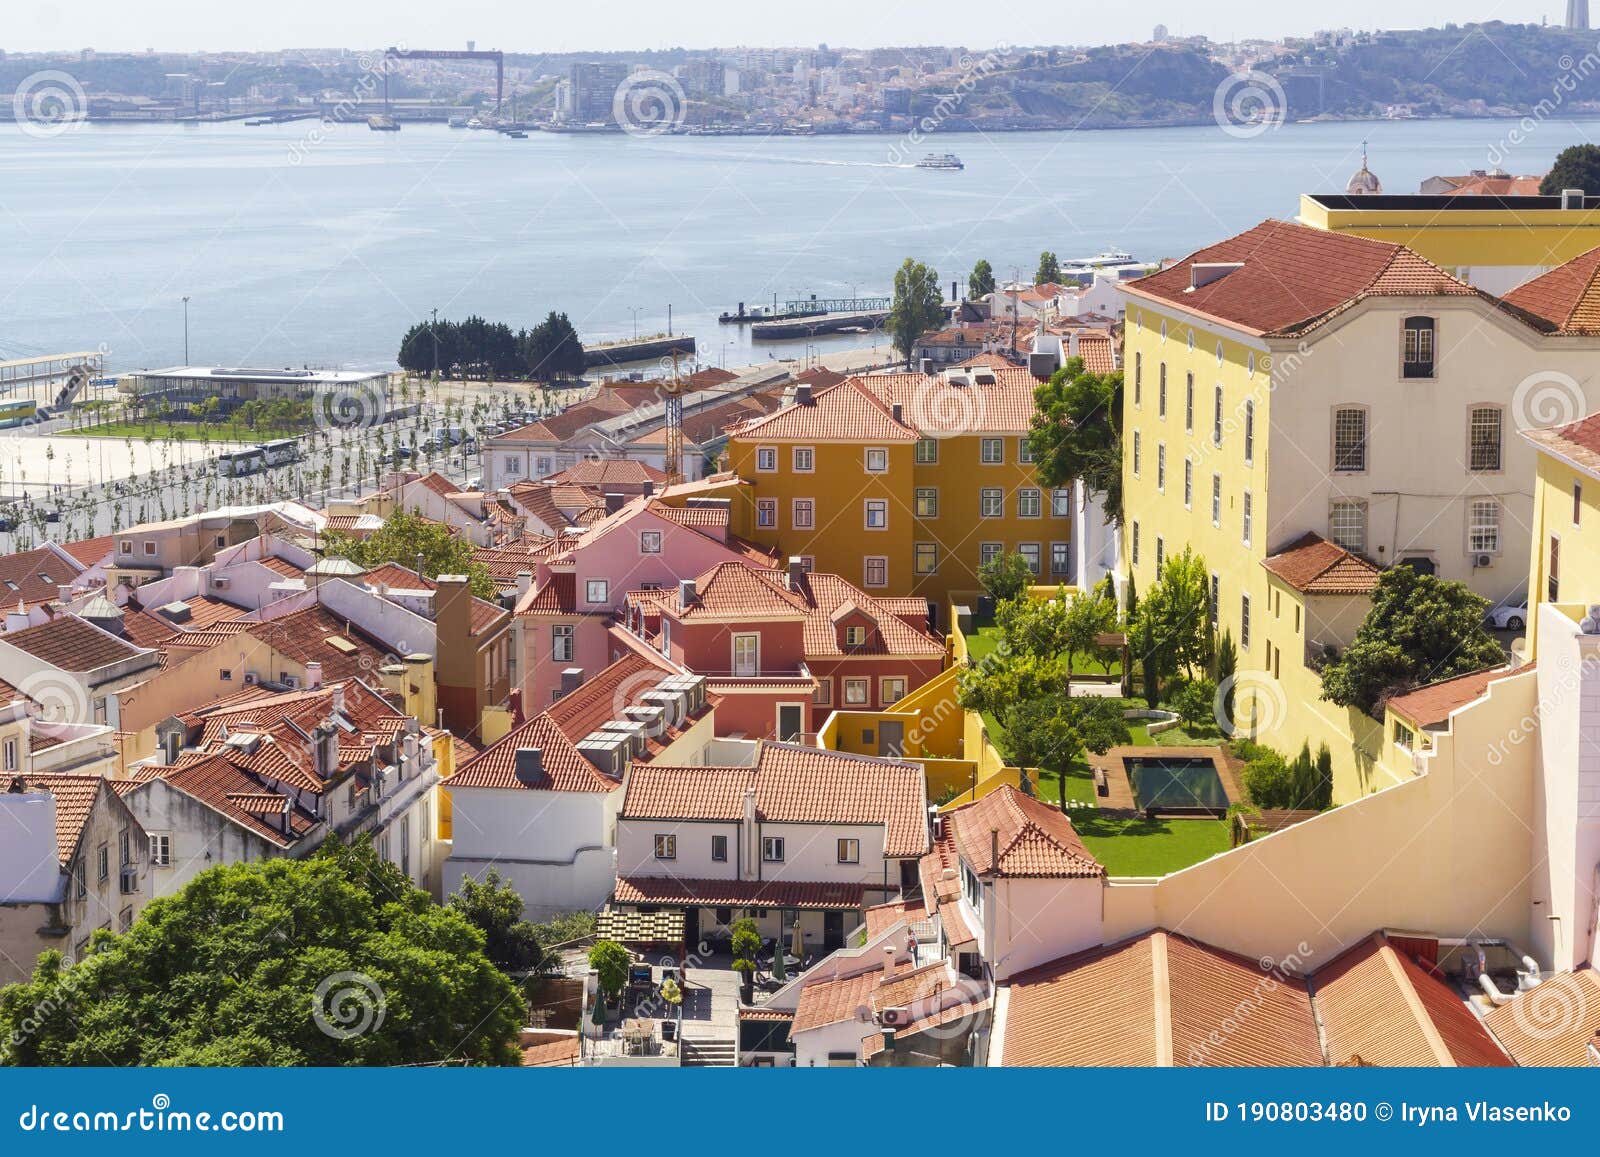 sun-lit panorama of the red-tiled lisbon roofs